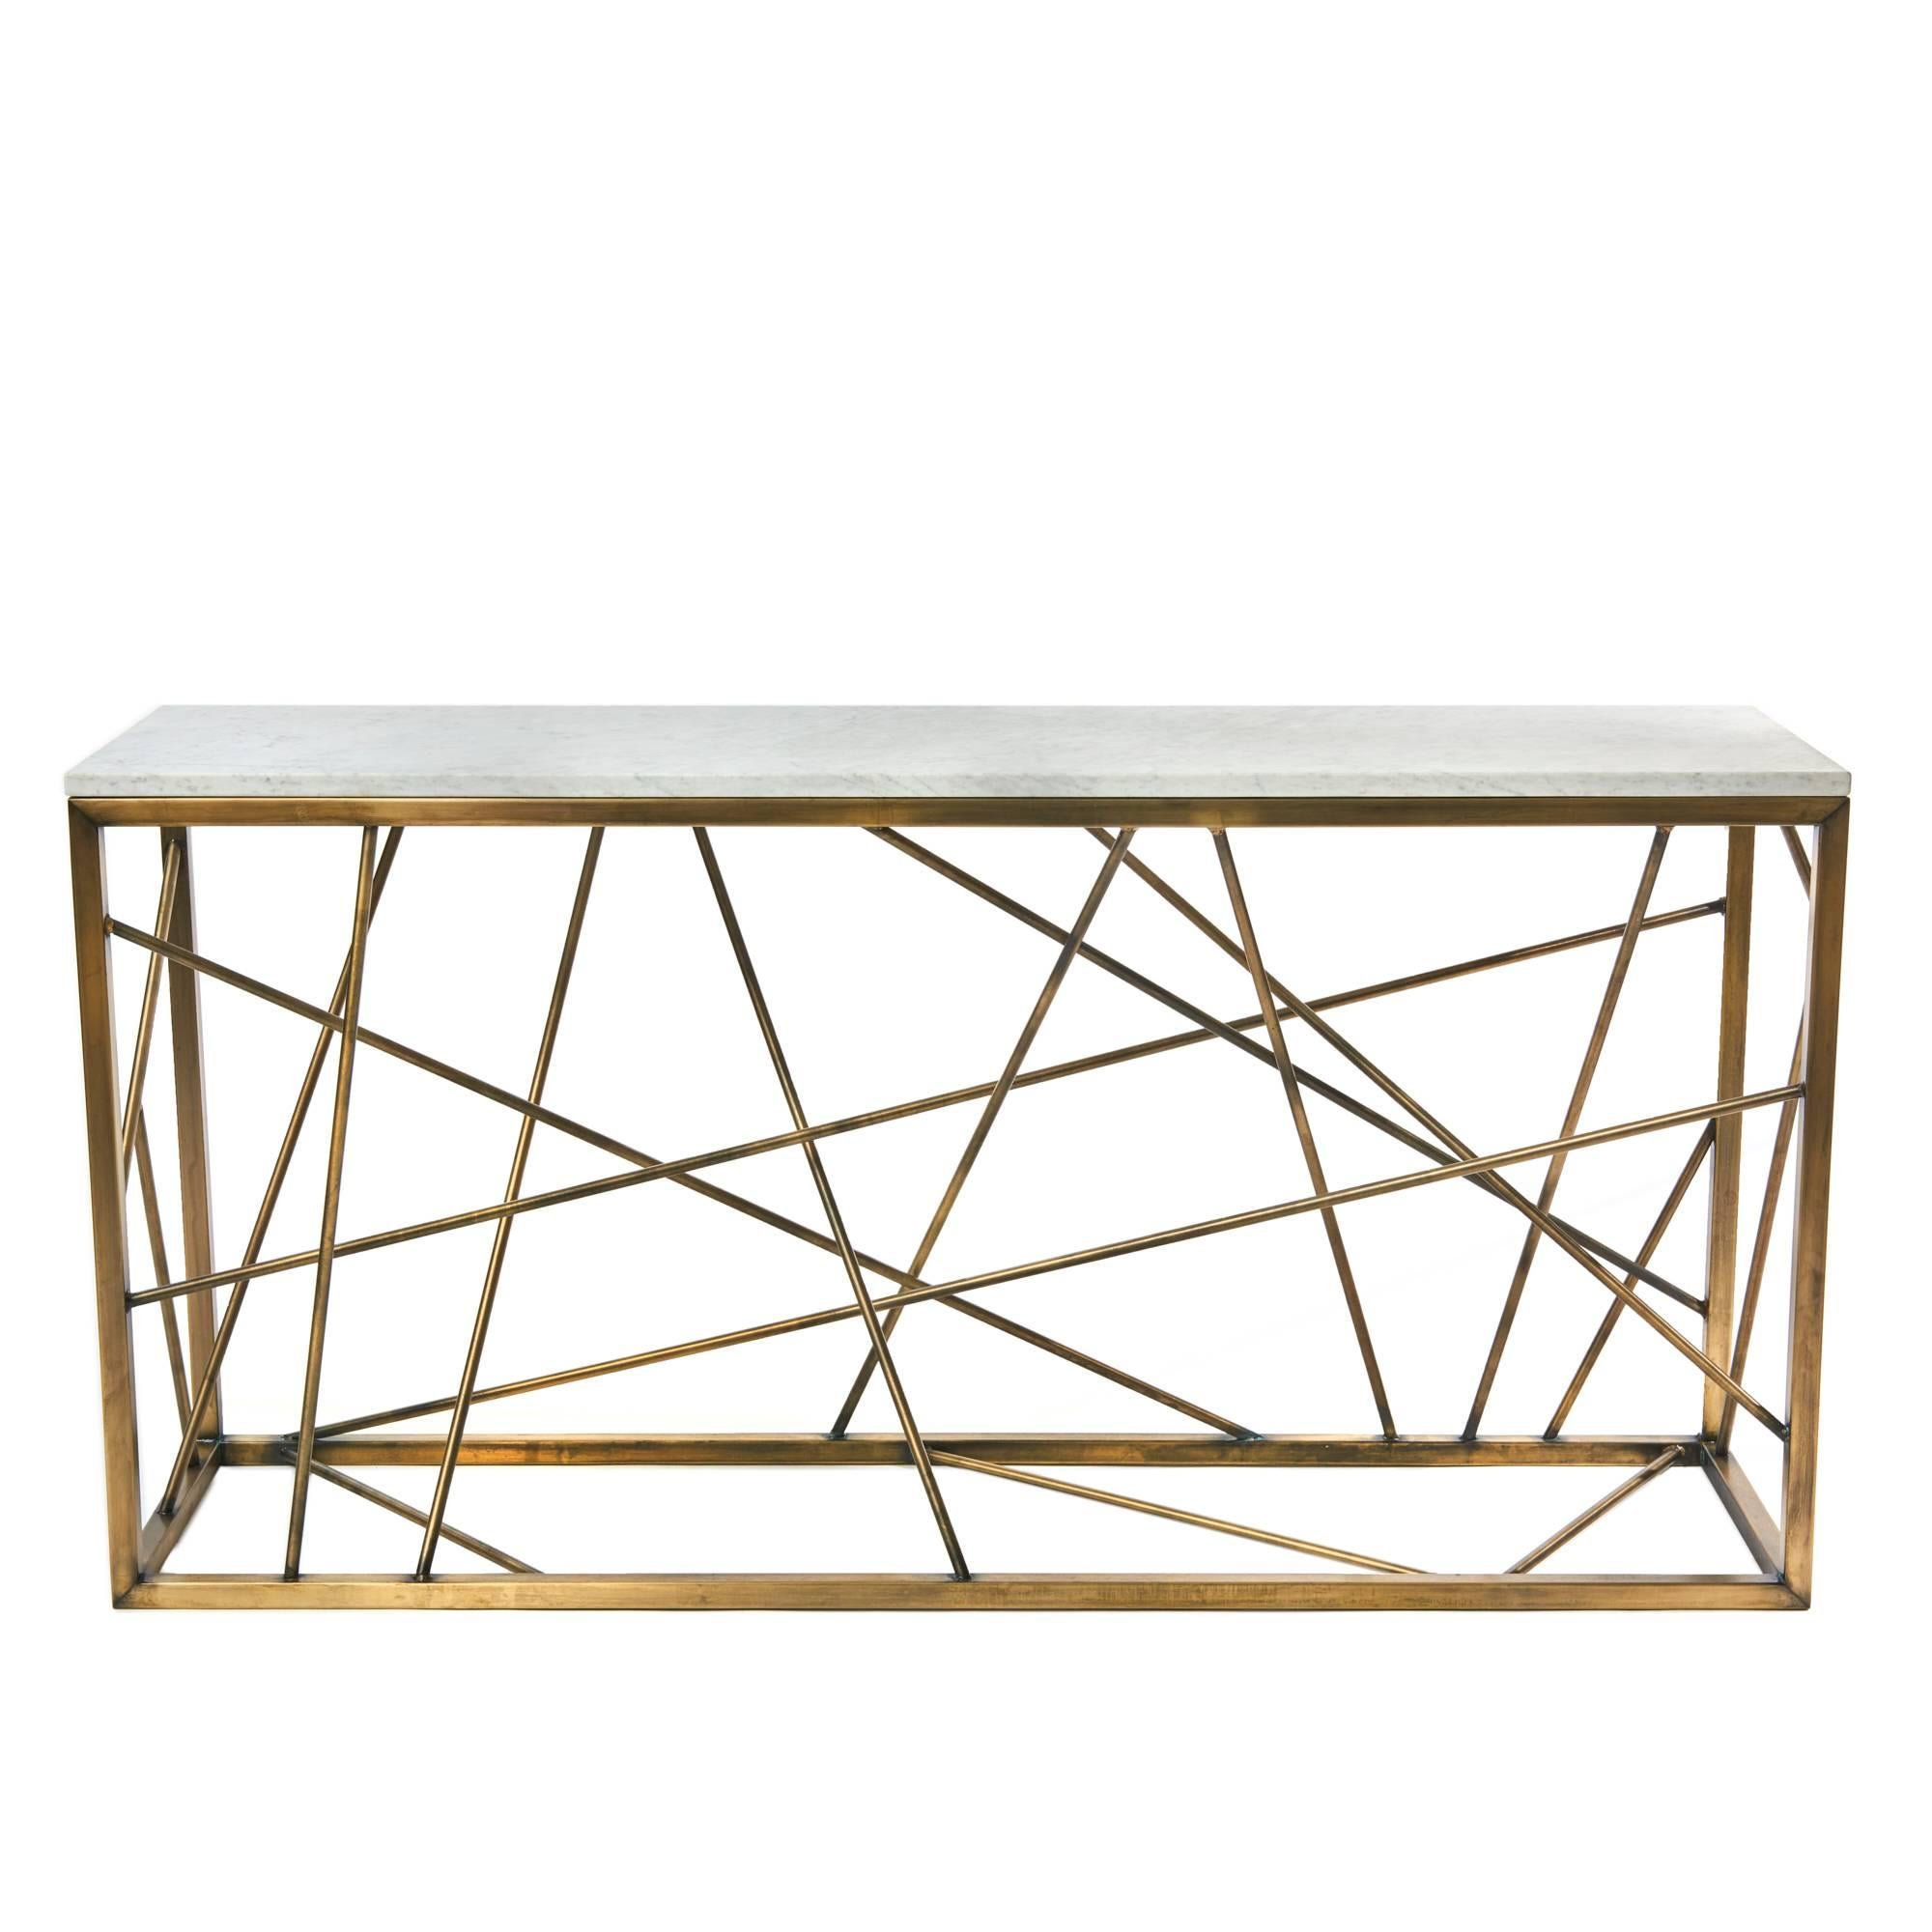 Nest Console by Morgan Clayhall, Sculptural Console, Steel and Marble Table (Moderne) im Angebot